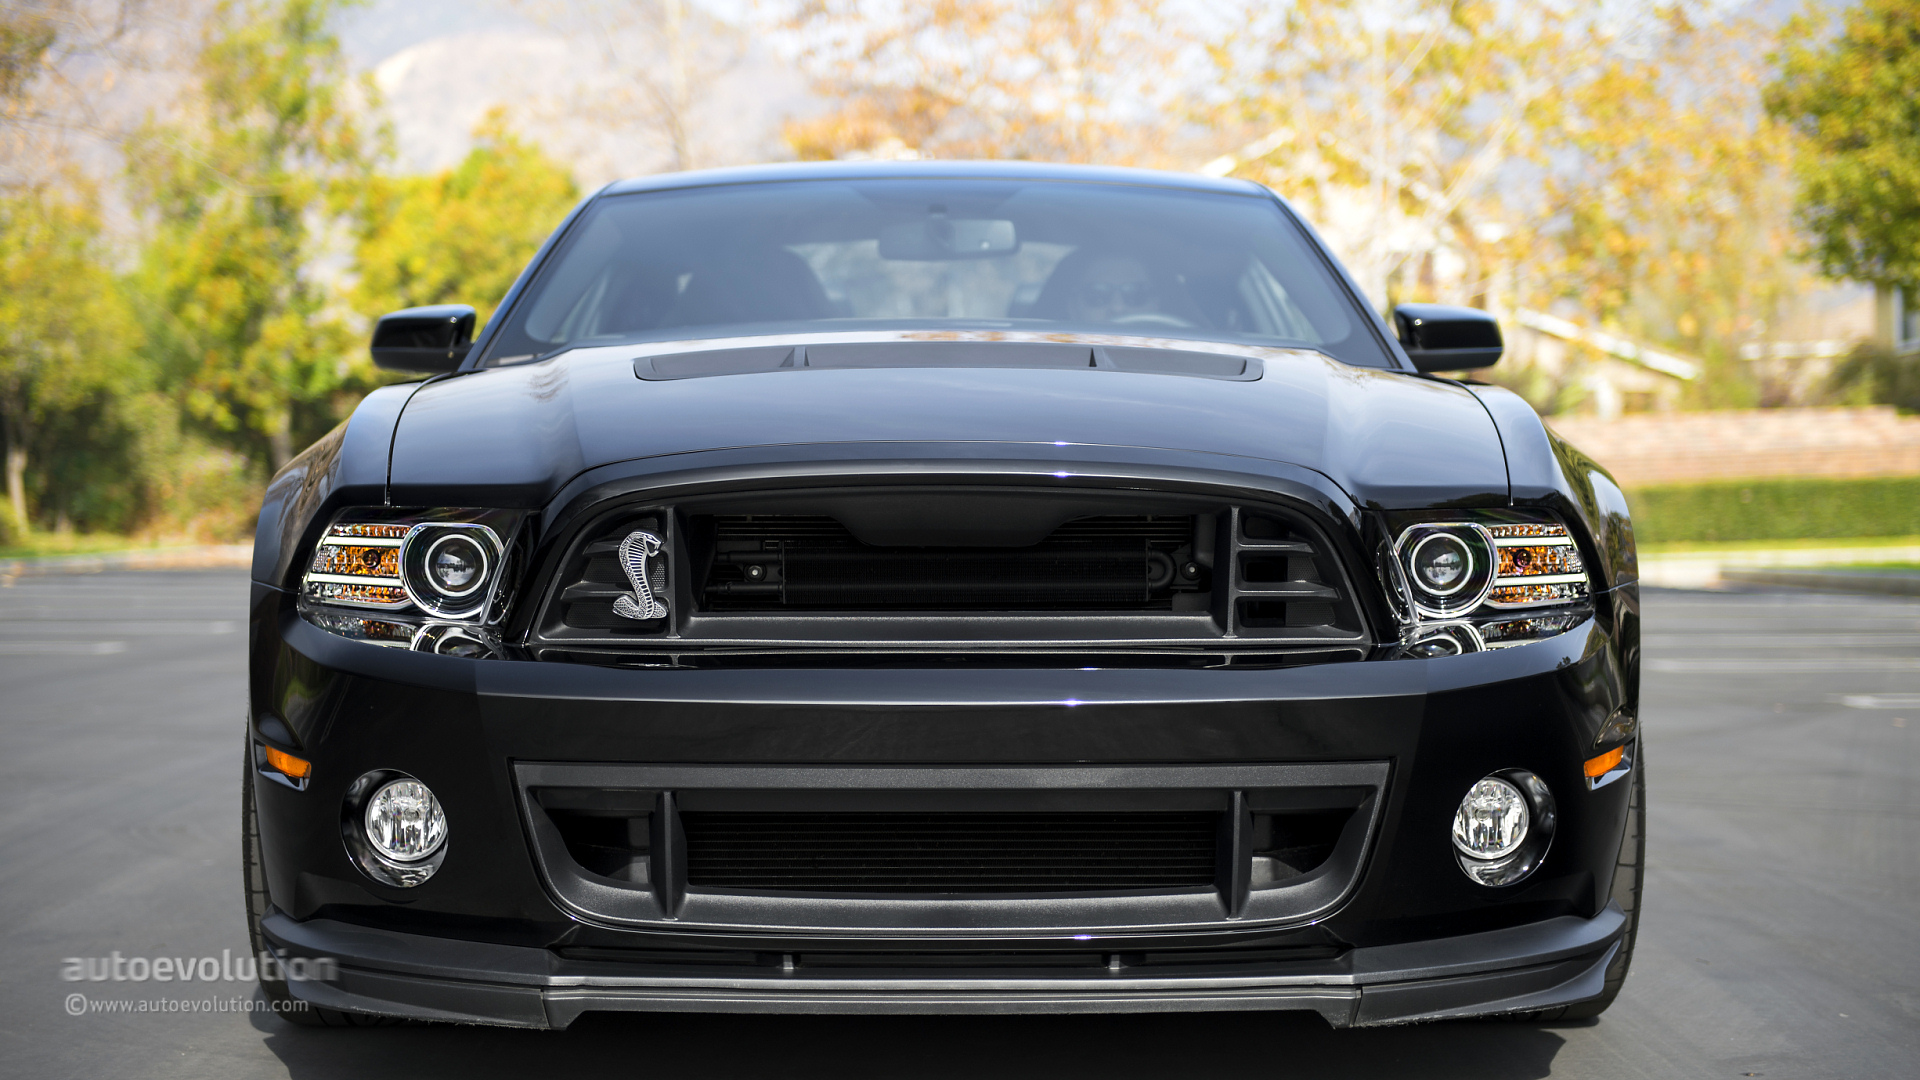 2014 Ford Mustang Shelby Gt500 Review Autoevolution